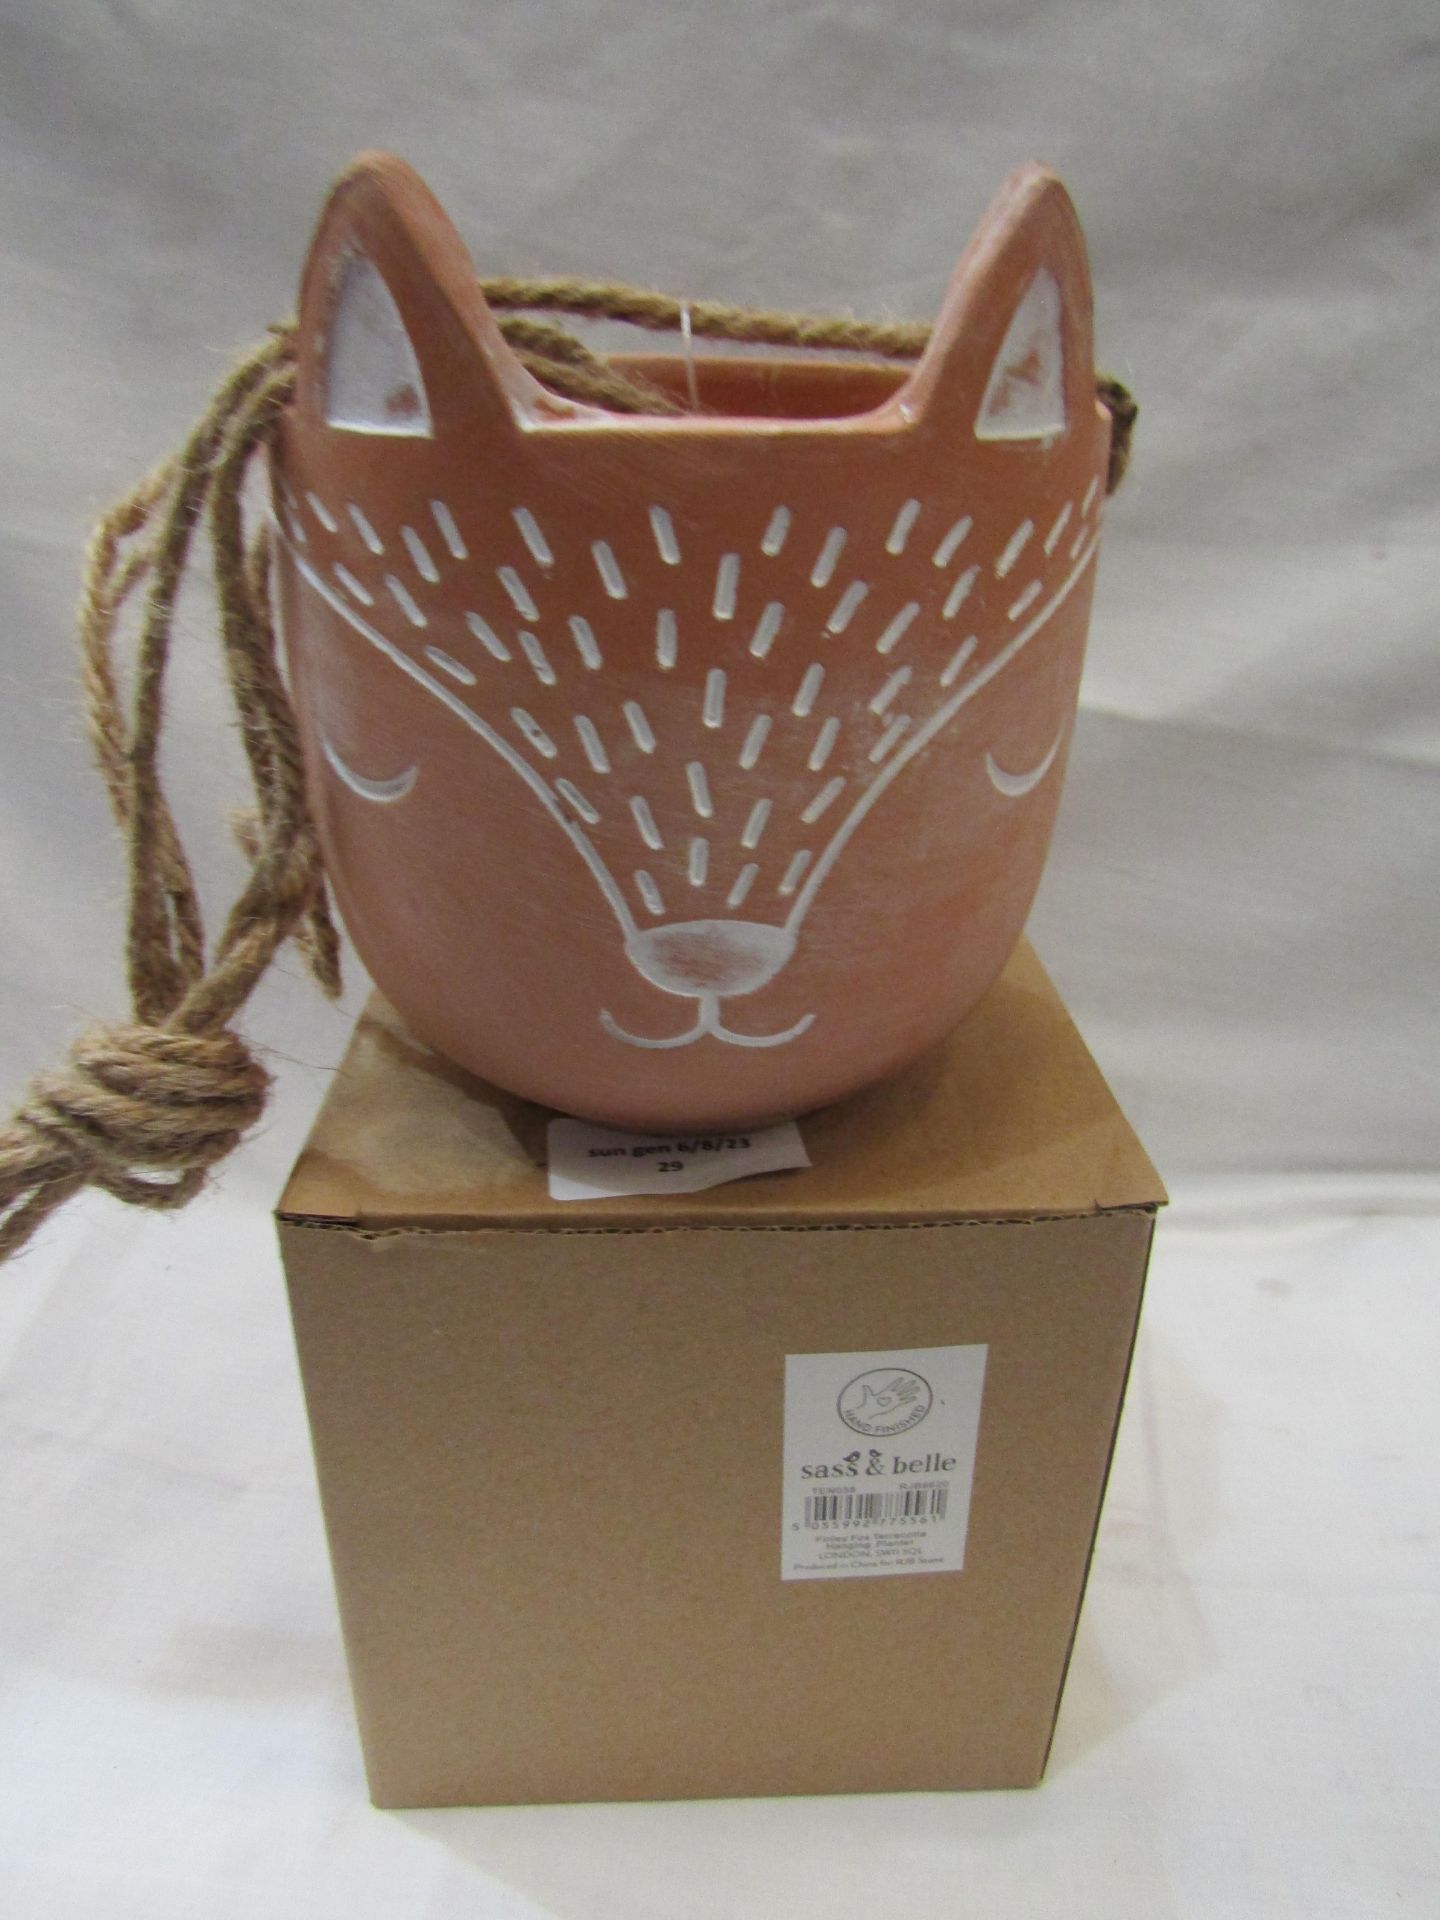 3 X Sasse & Belle Hanging Planters Hand Finished Terracotta Approx 5" New & Boxed